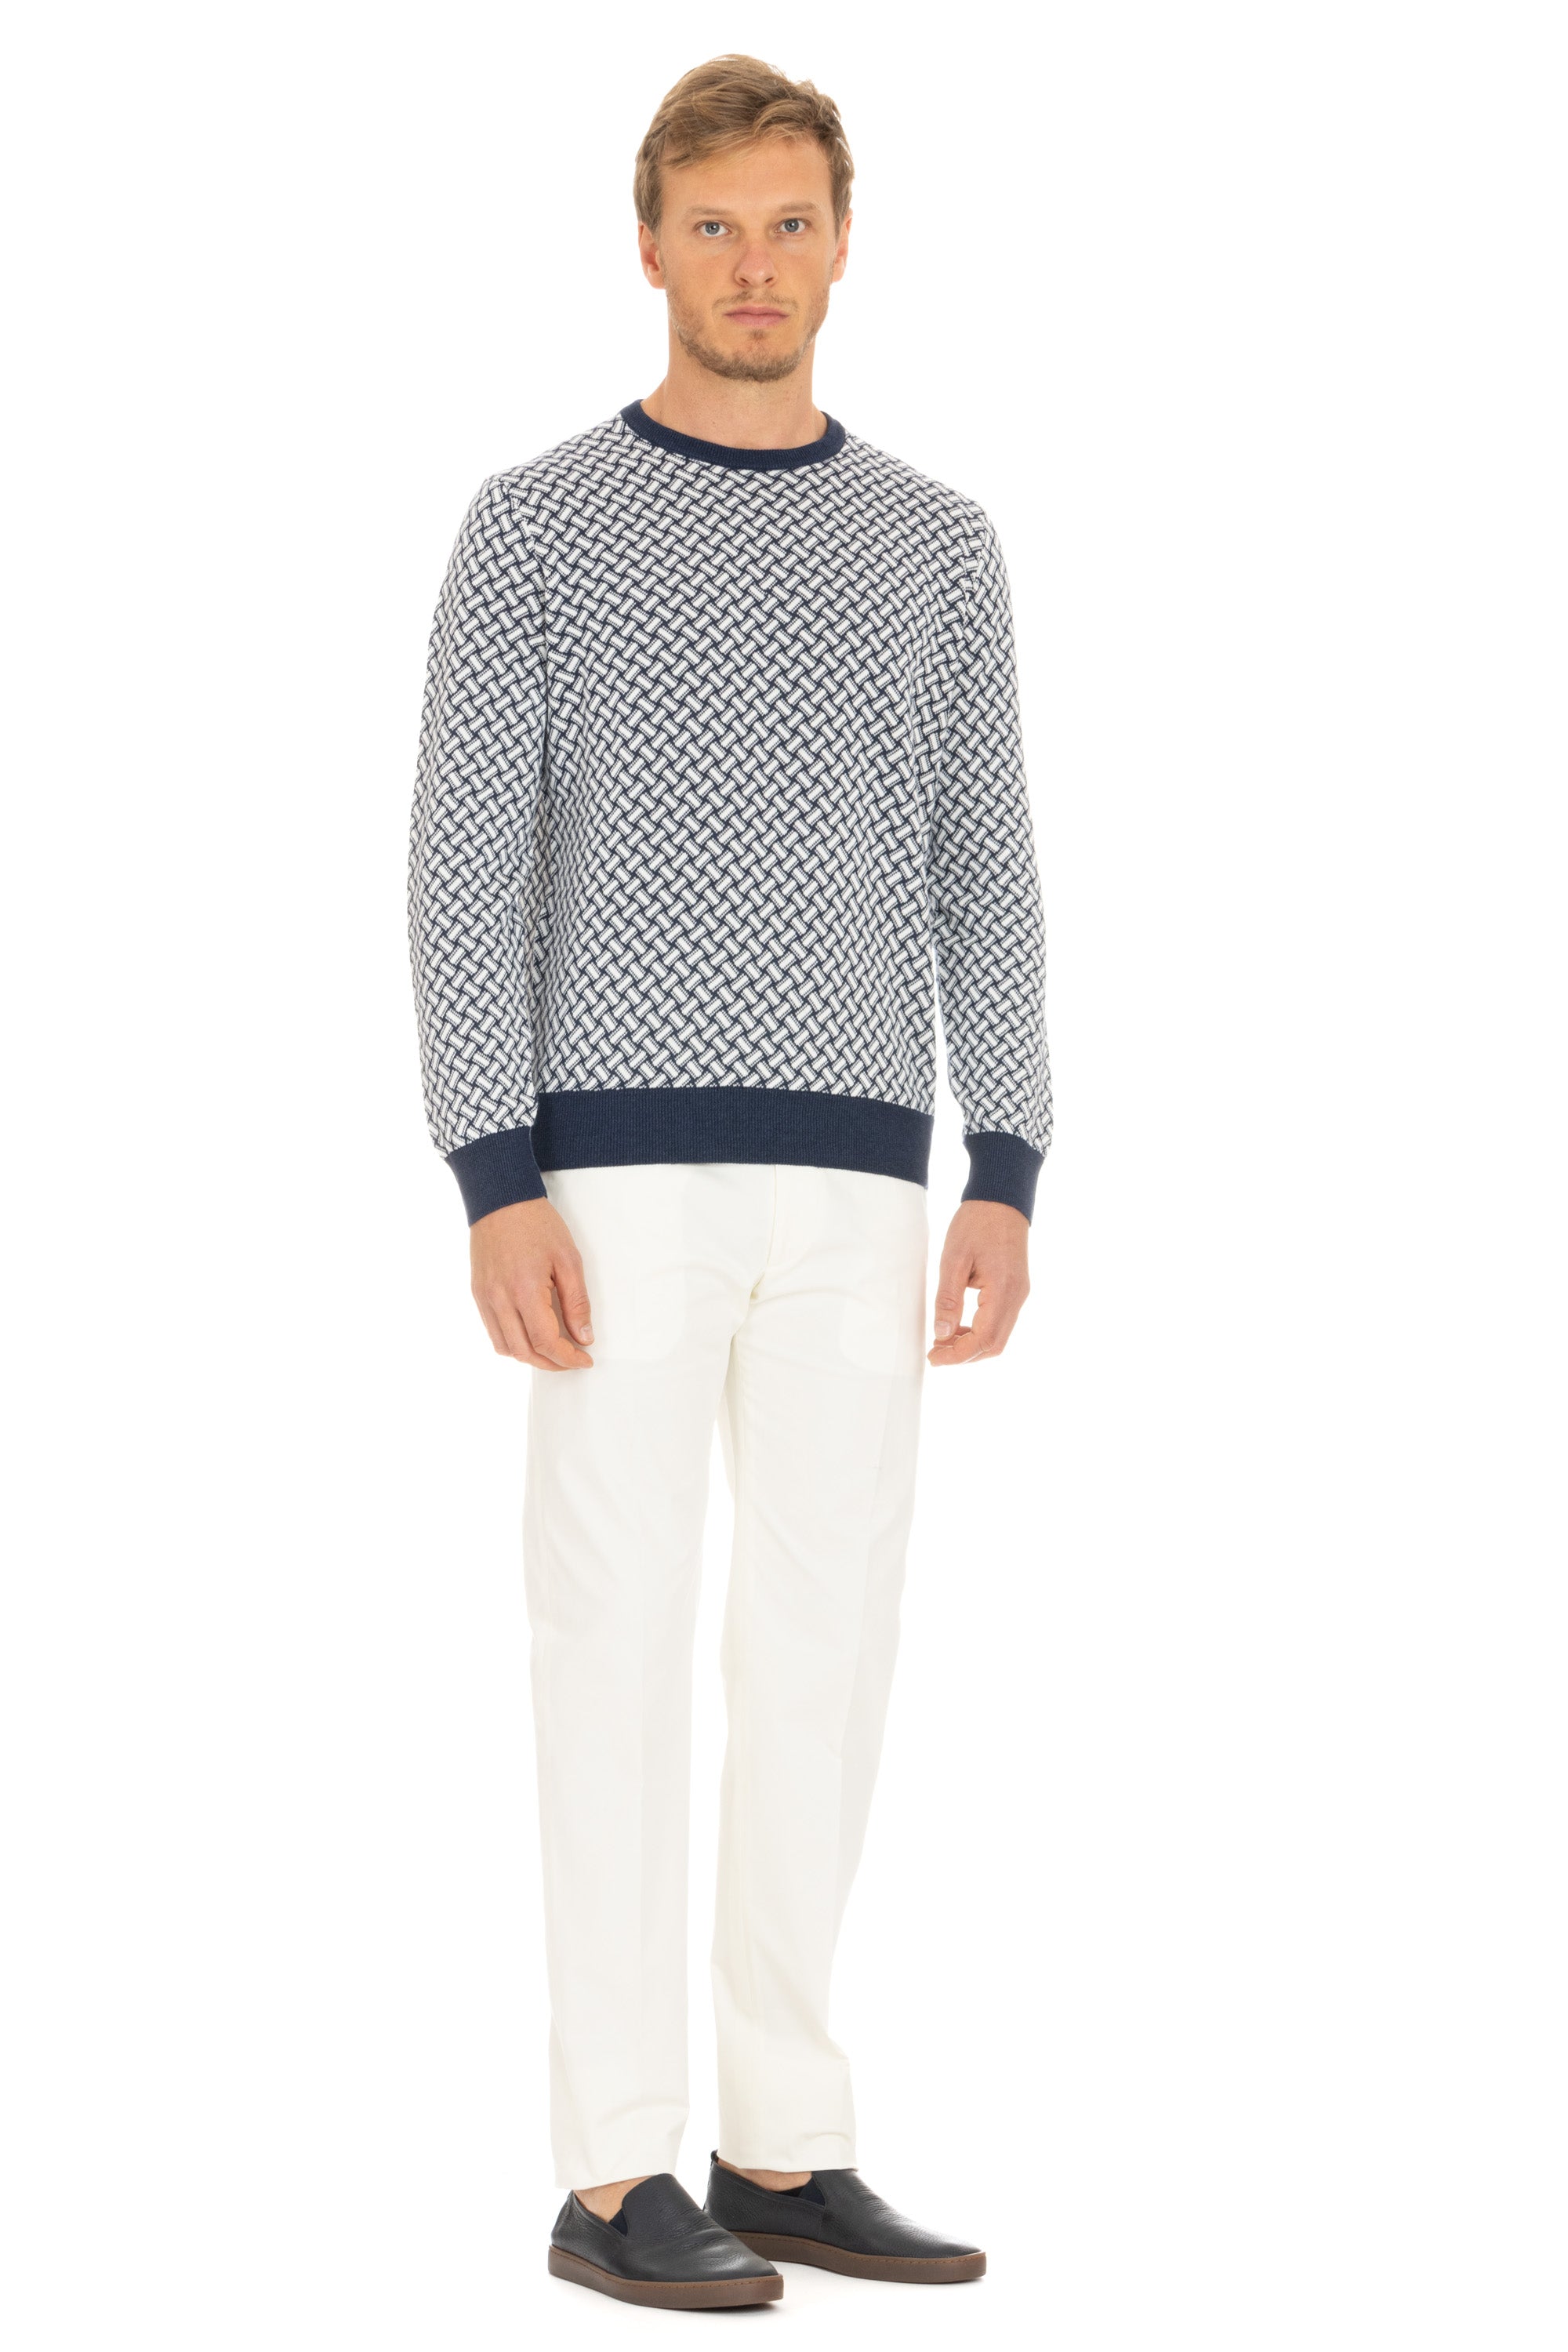 Crew-neck sweater in biscuit-patterned cotton-linen